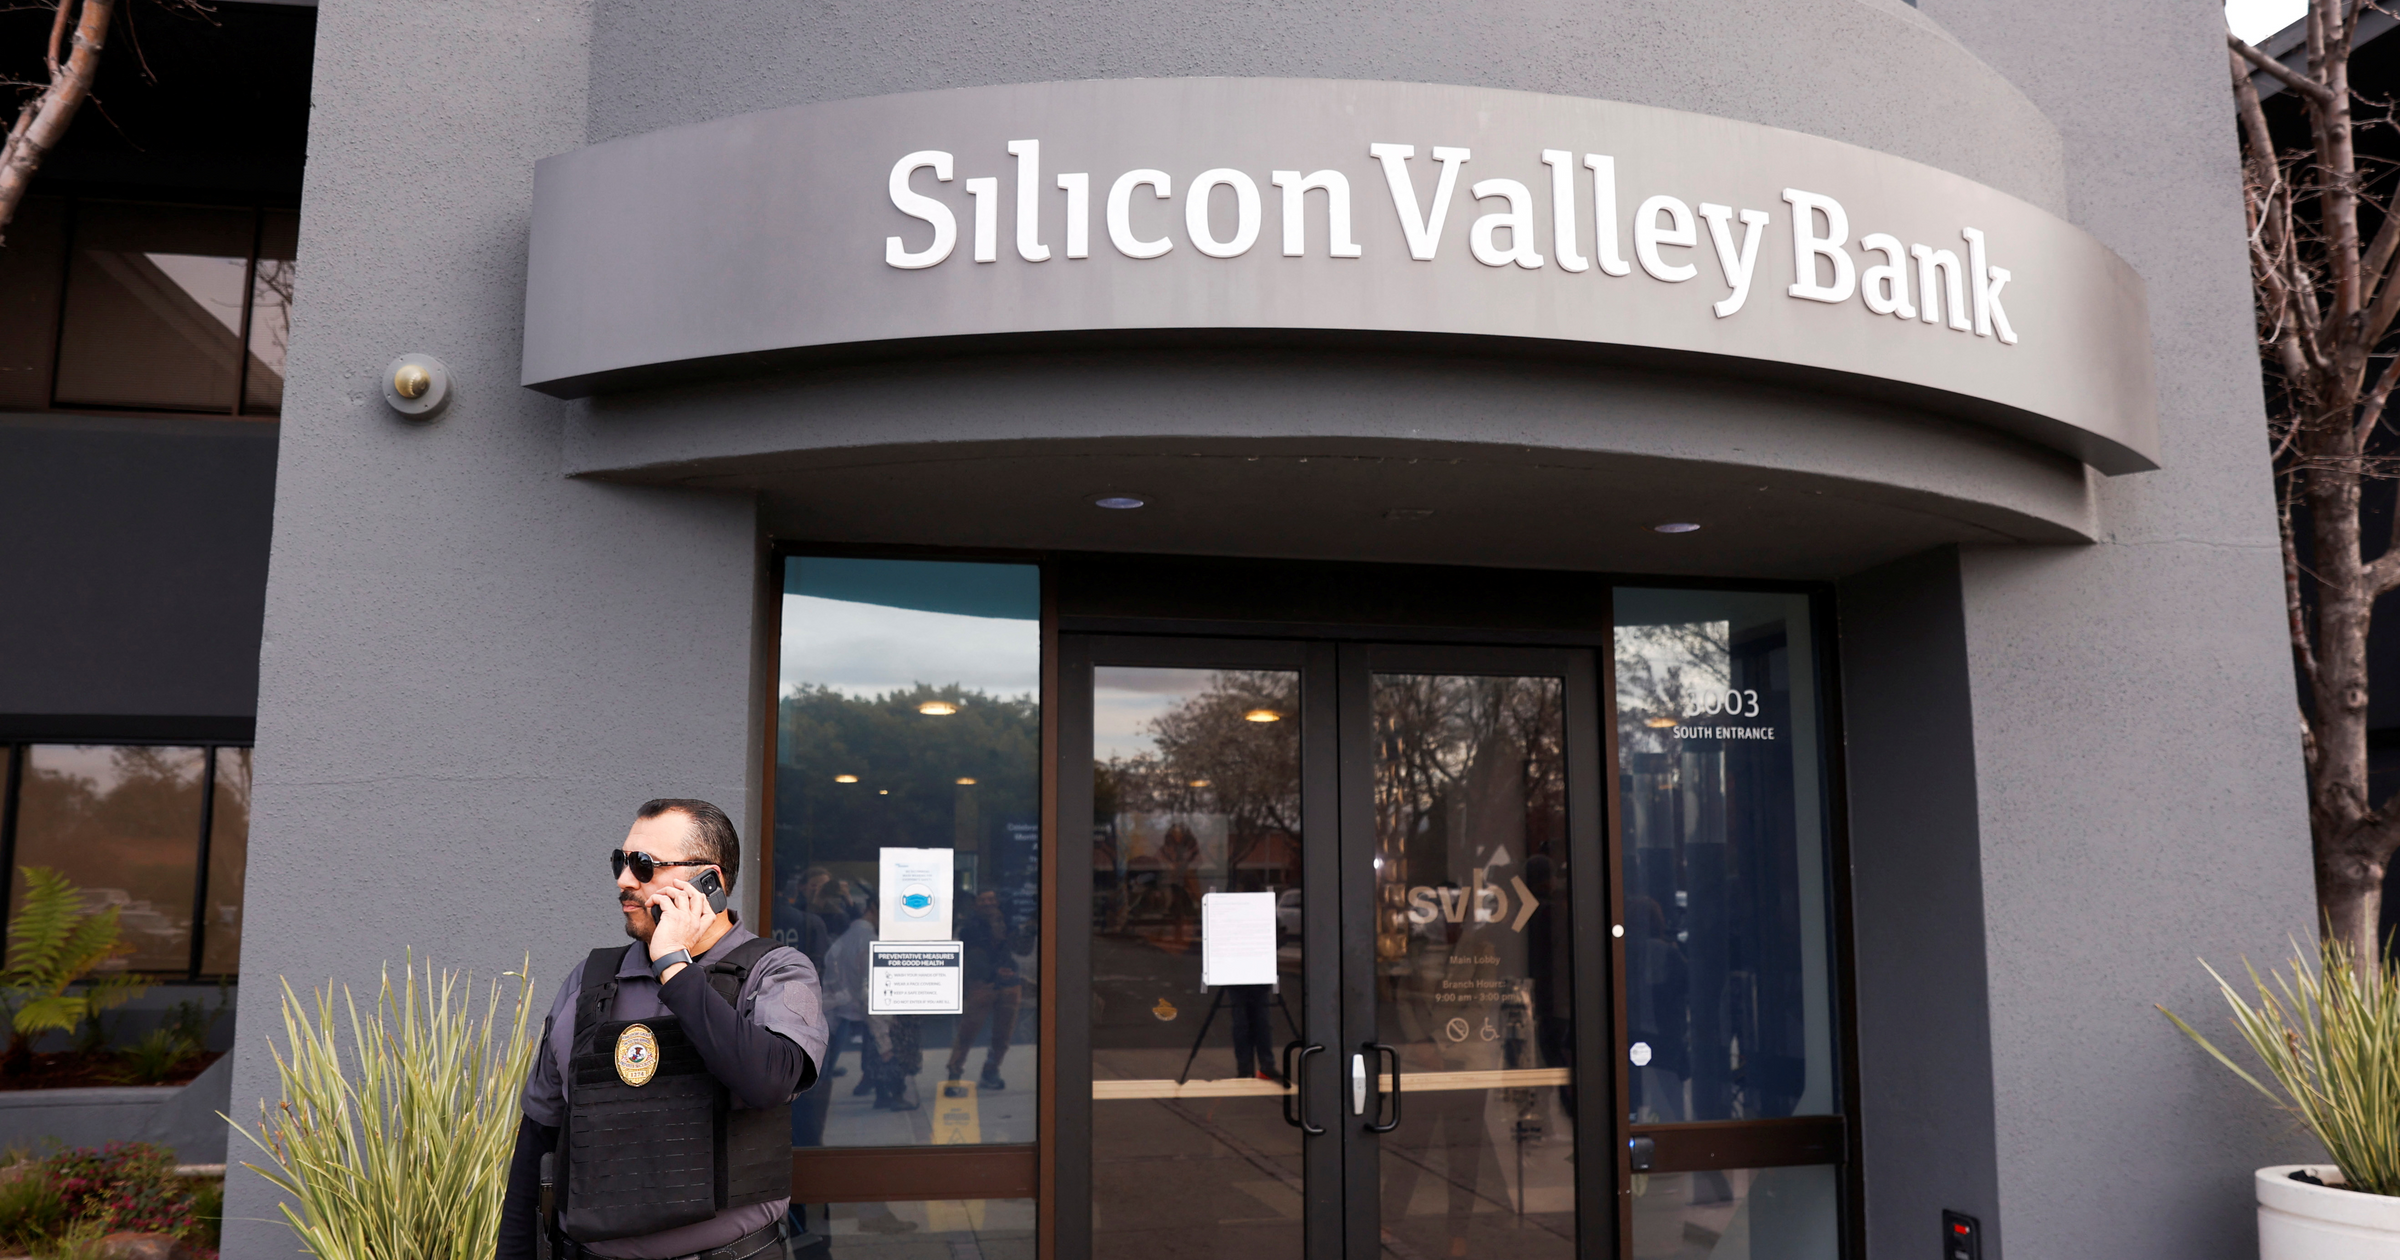 The largest U.S. banks didn’t submit a bid for Silicon Valley Bank over the weekend, largely because they were initially excluded from the sales pro